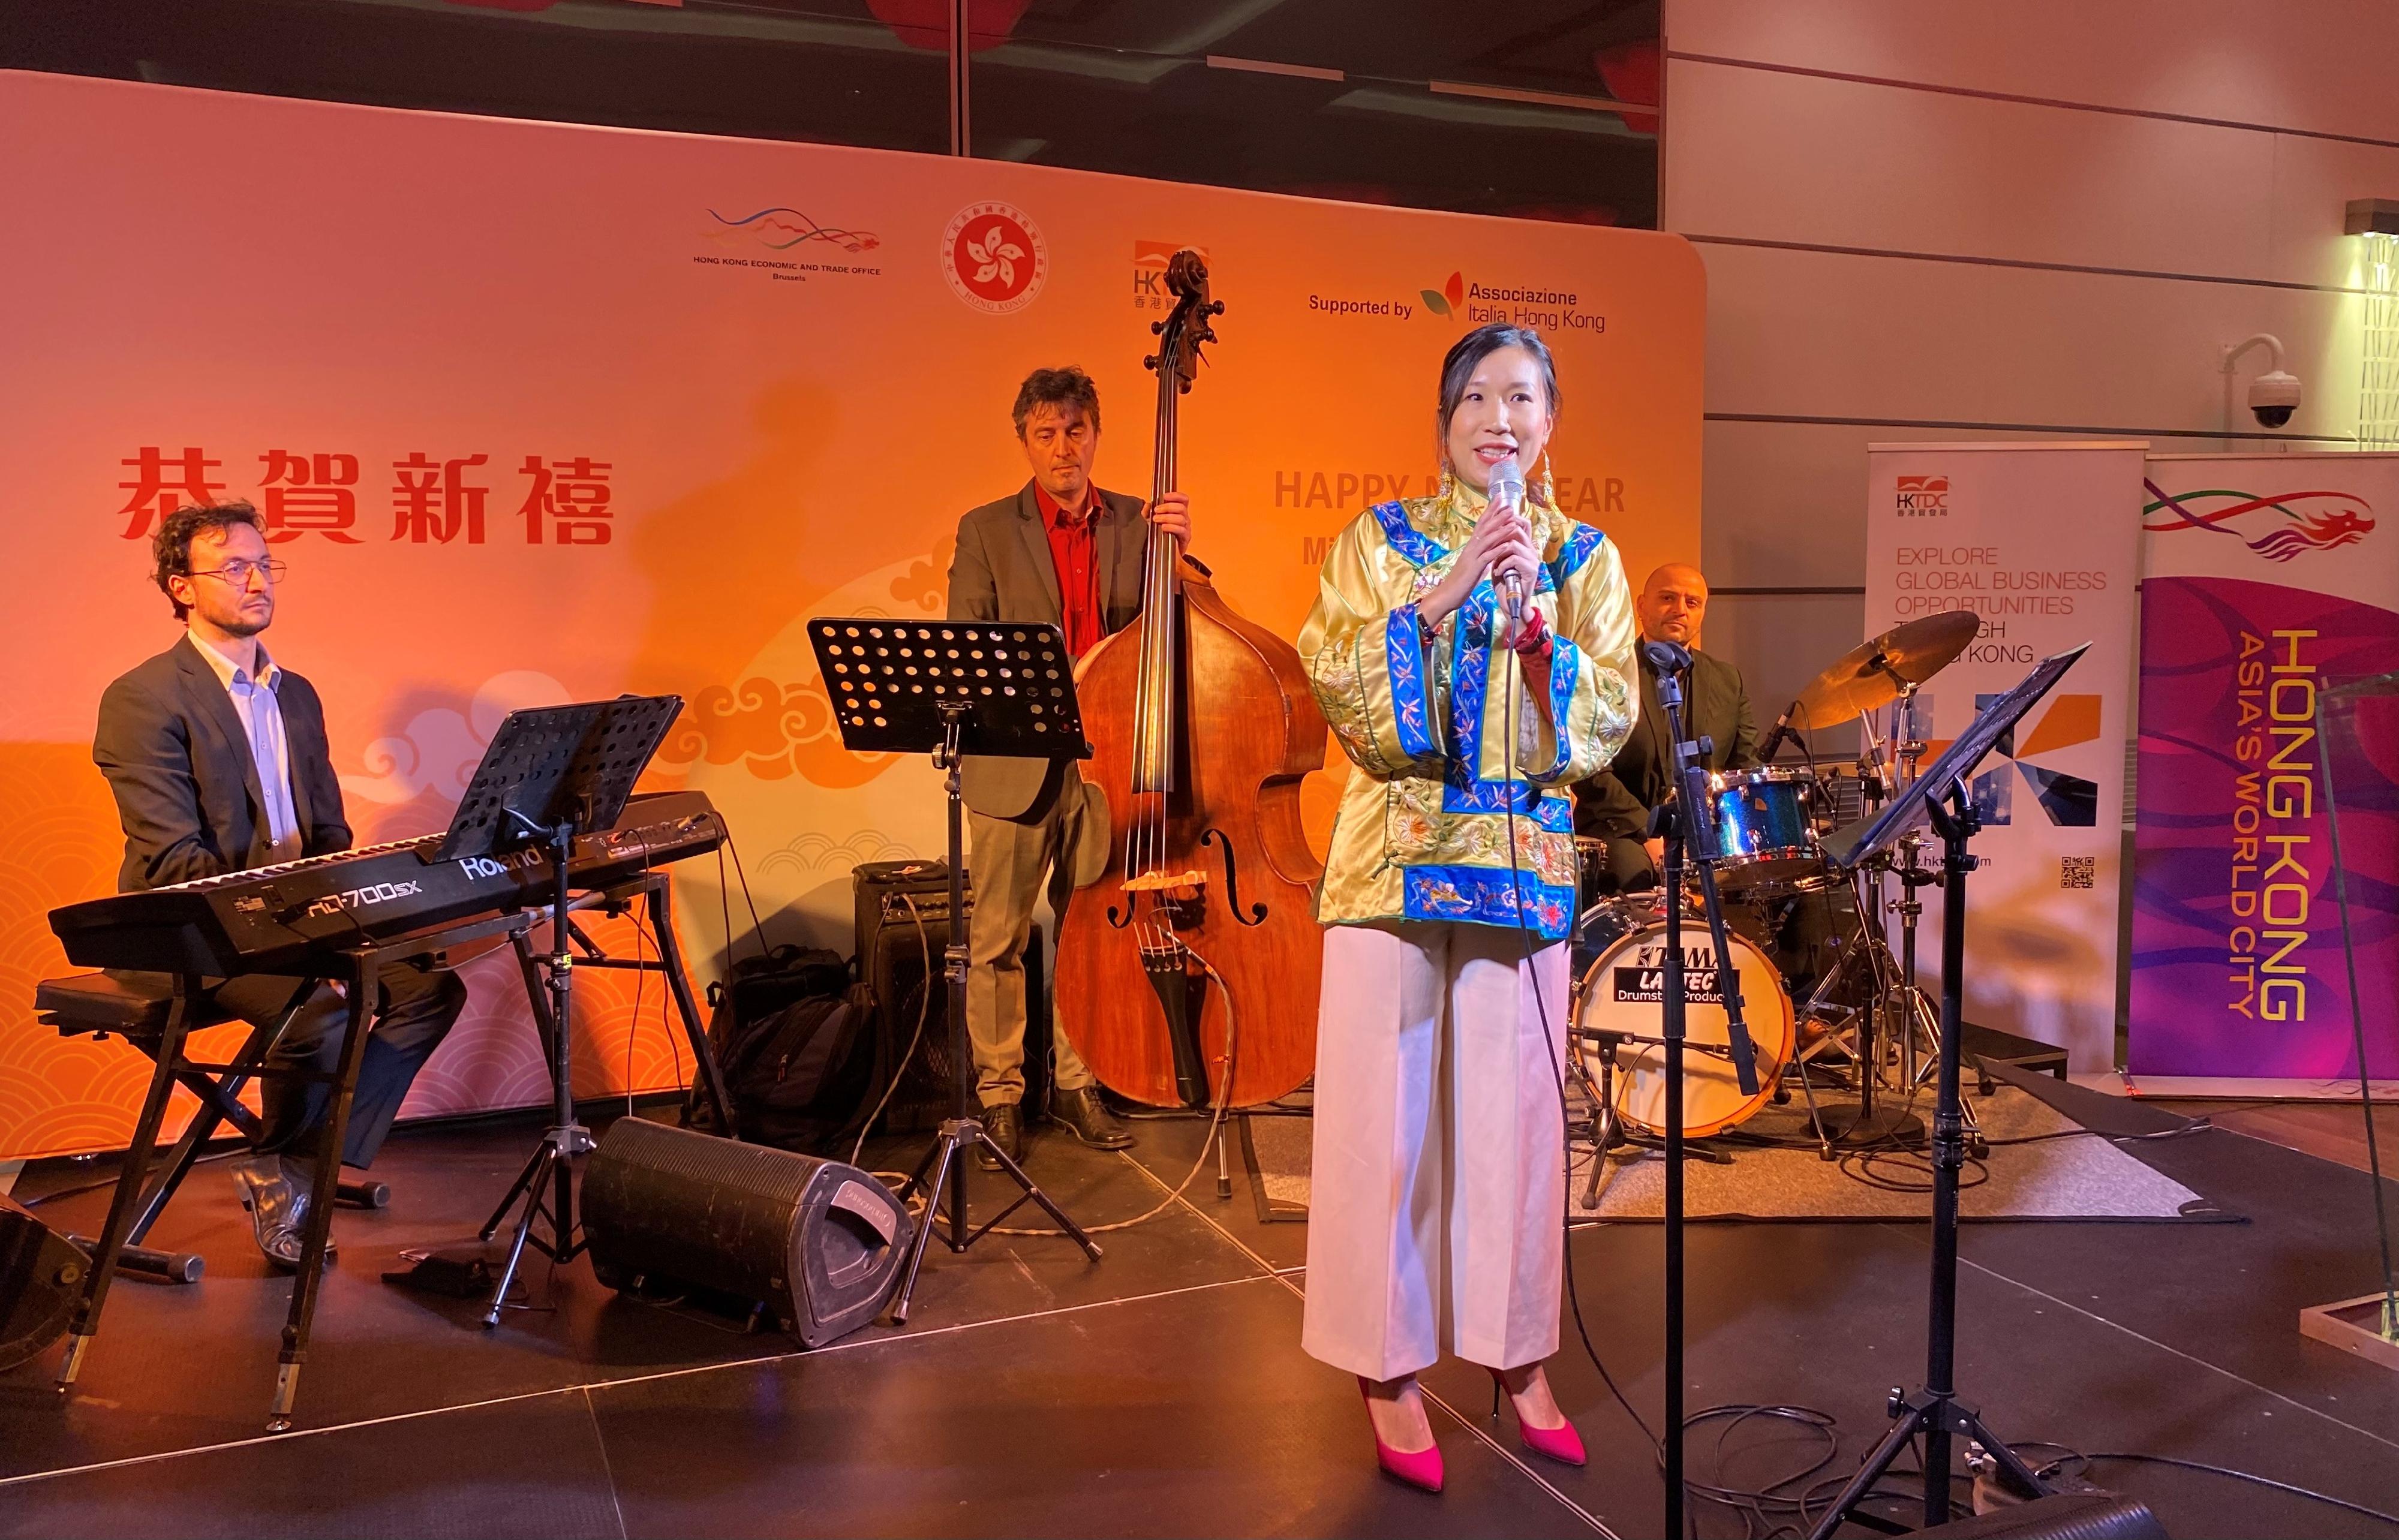 The Hong Kong Economic and Trade Office, Brussels invited Heidi Li, a Hong Kong born Jazz vocalist and composer to stage a performance in a quartet with Italian musicians, to showcase Hong Kong's East-meet-West culture in the Chinese New Year reception held in Milan, Italy on February 6 (Milan time).